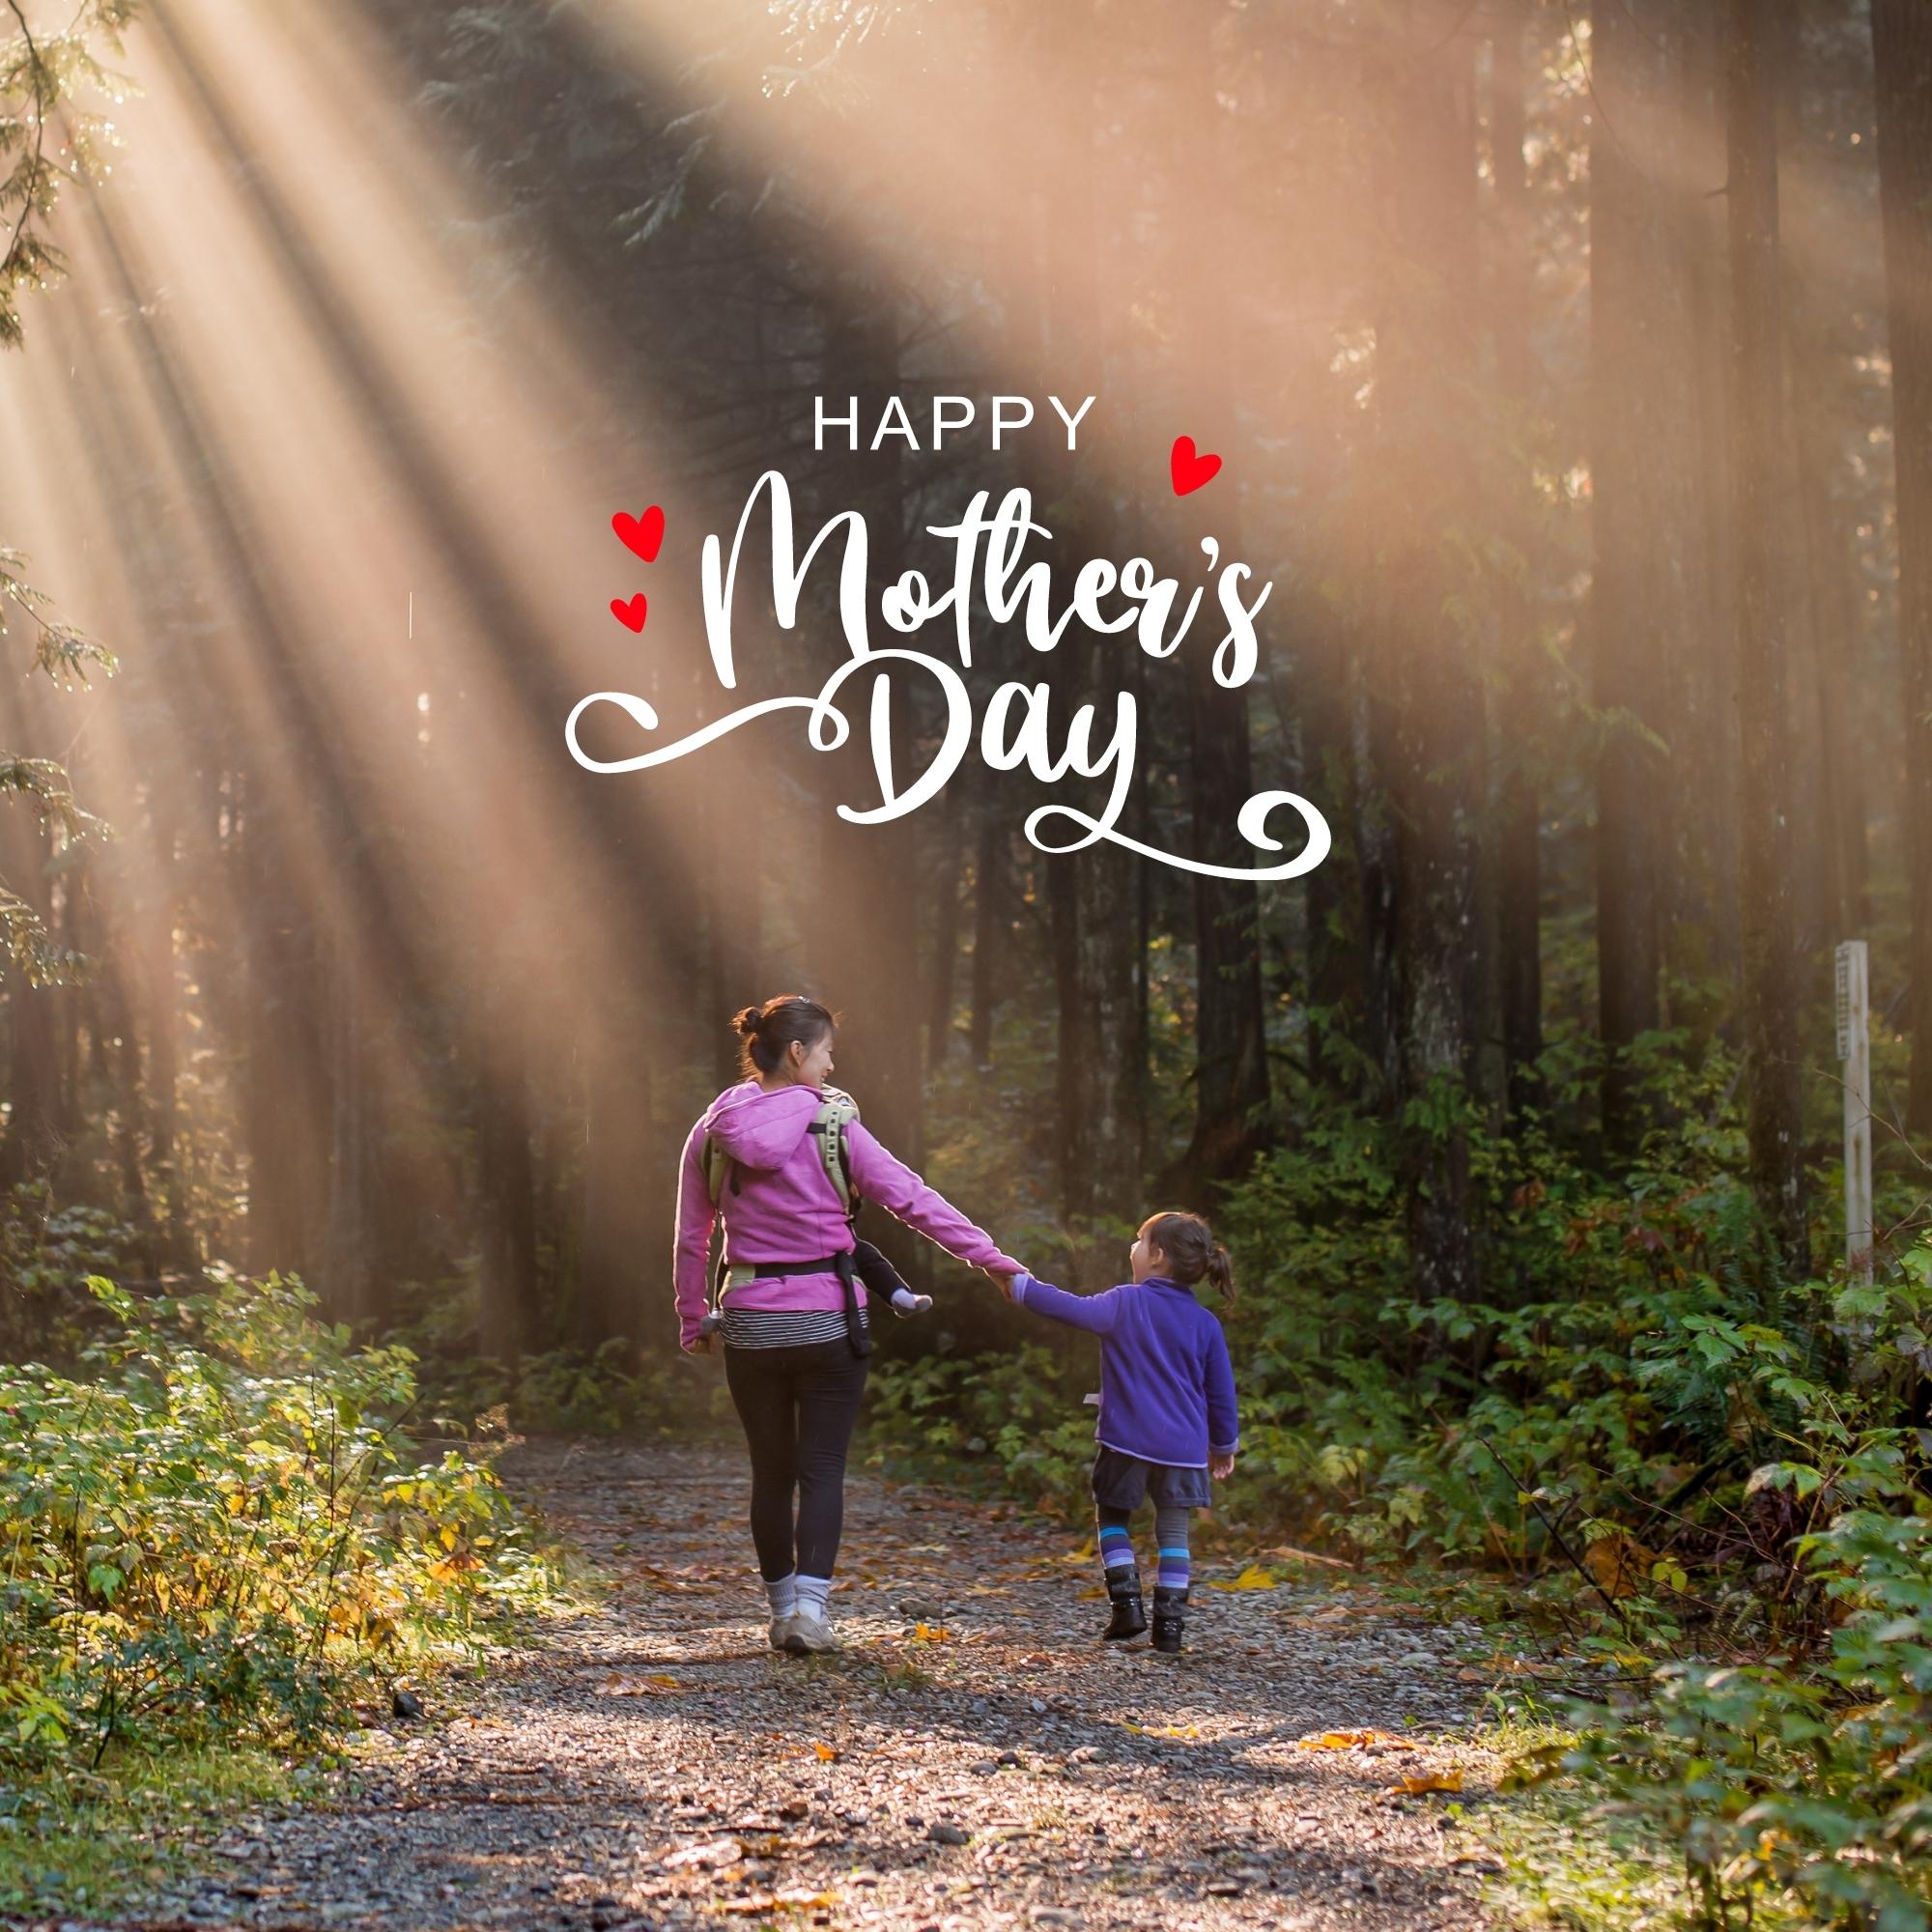 Happy Mothers Day Images | 1025 | Free Download [8k,4k,Hd]